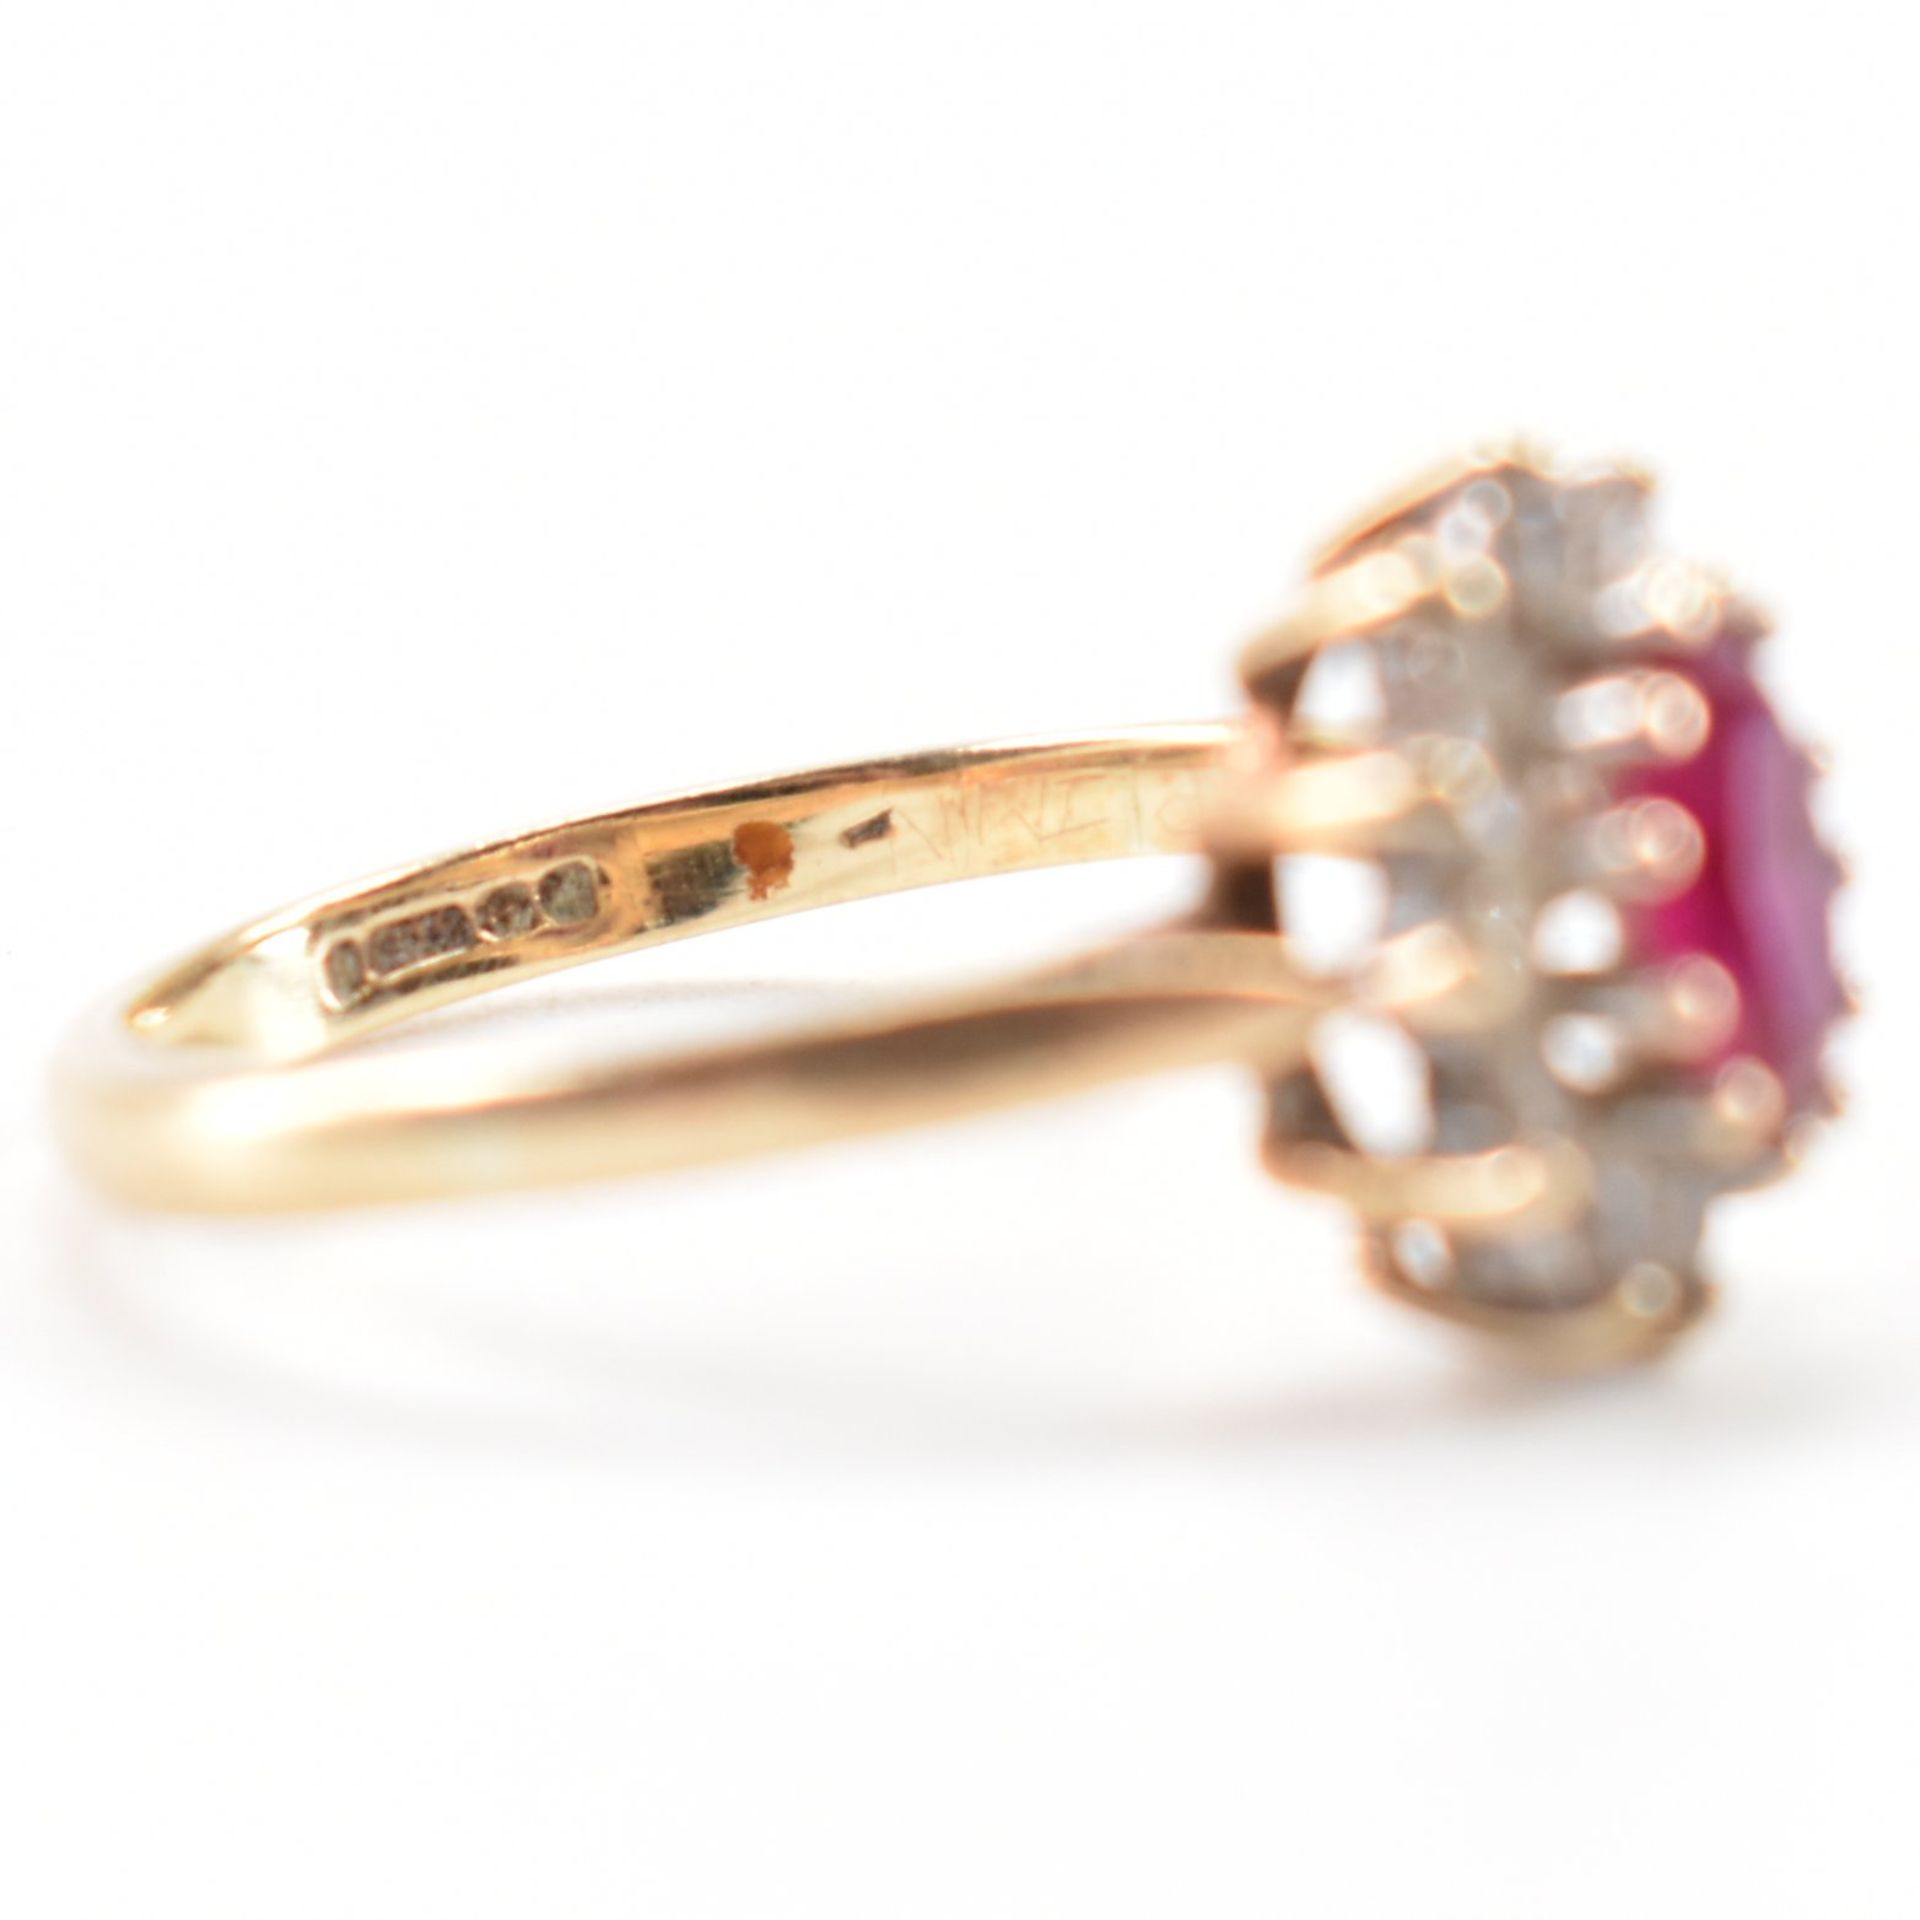 HALLMARKED 9CT GOLD PINK & WHITE STONE CLUSTER RING - Image 5 of 8